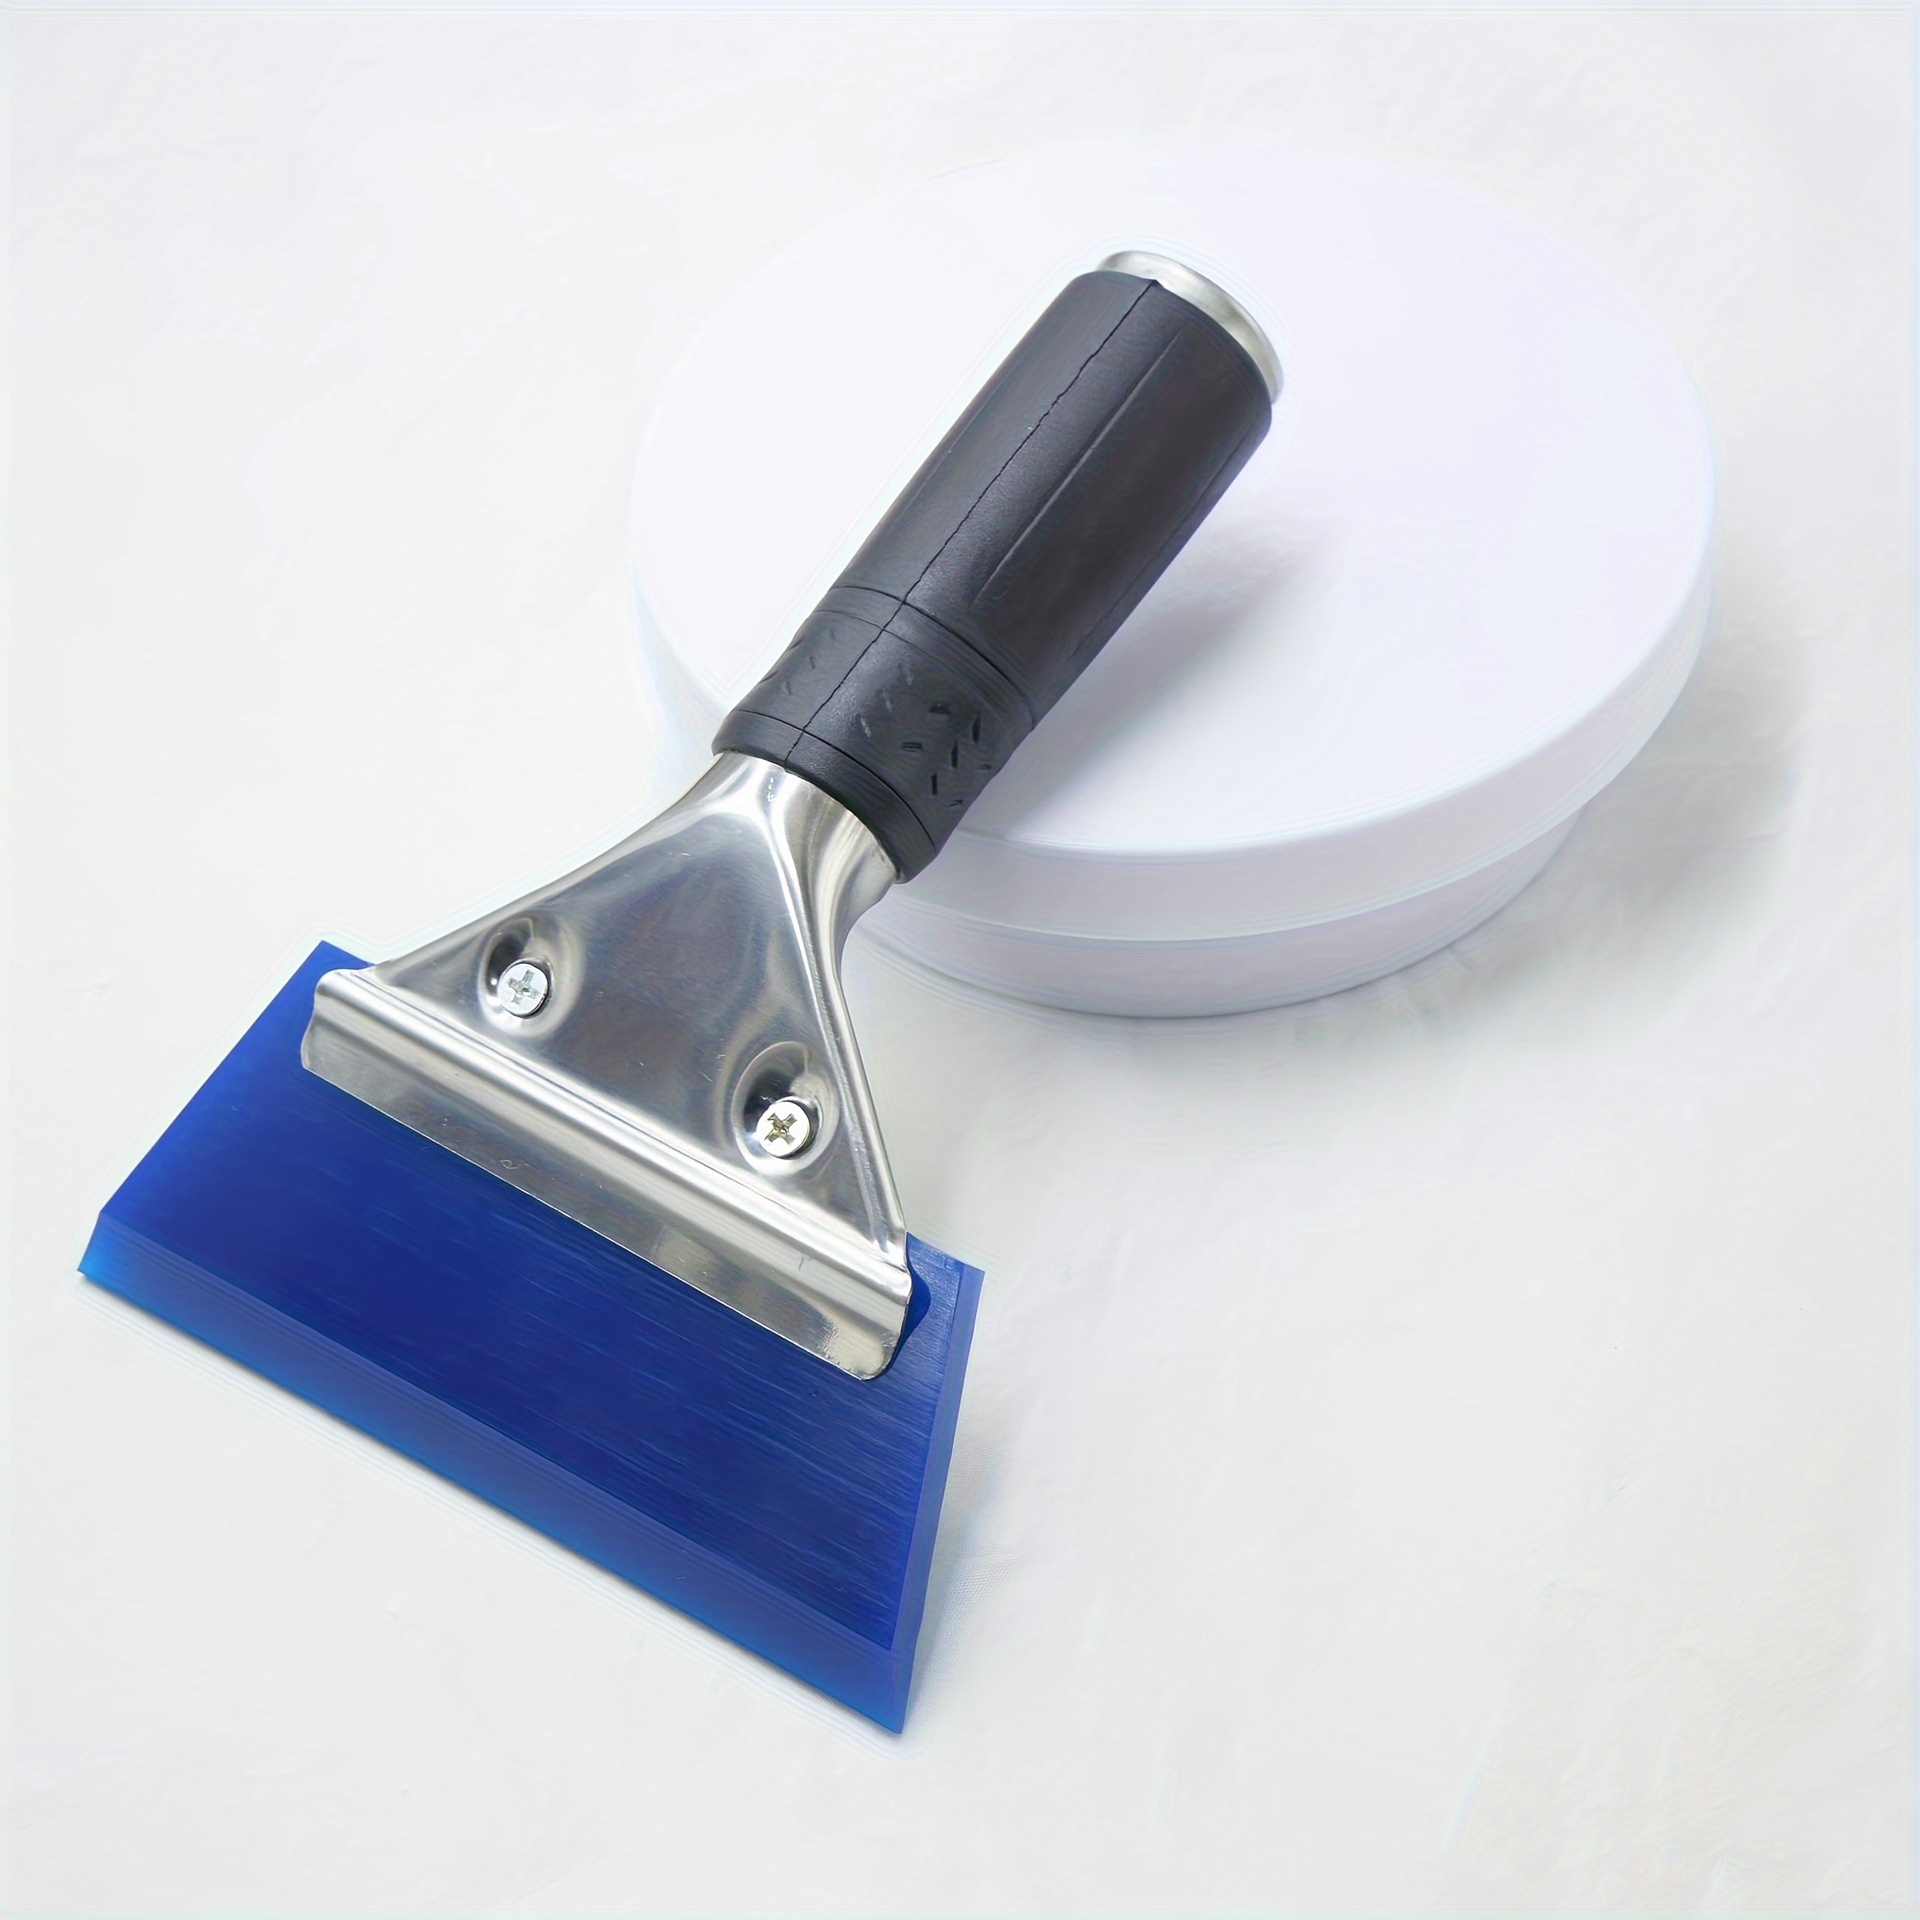 6 Inch Rubber Squeegee for Kitchens, Glass, Shower and Car Windows, Film  Install